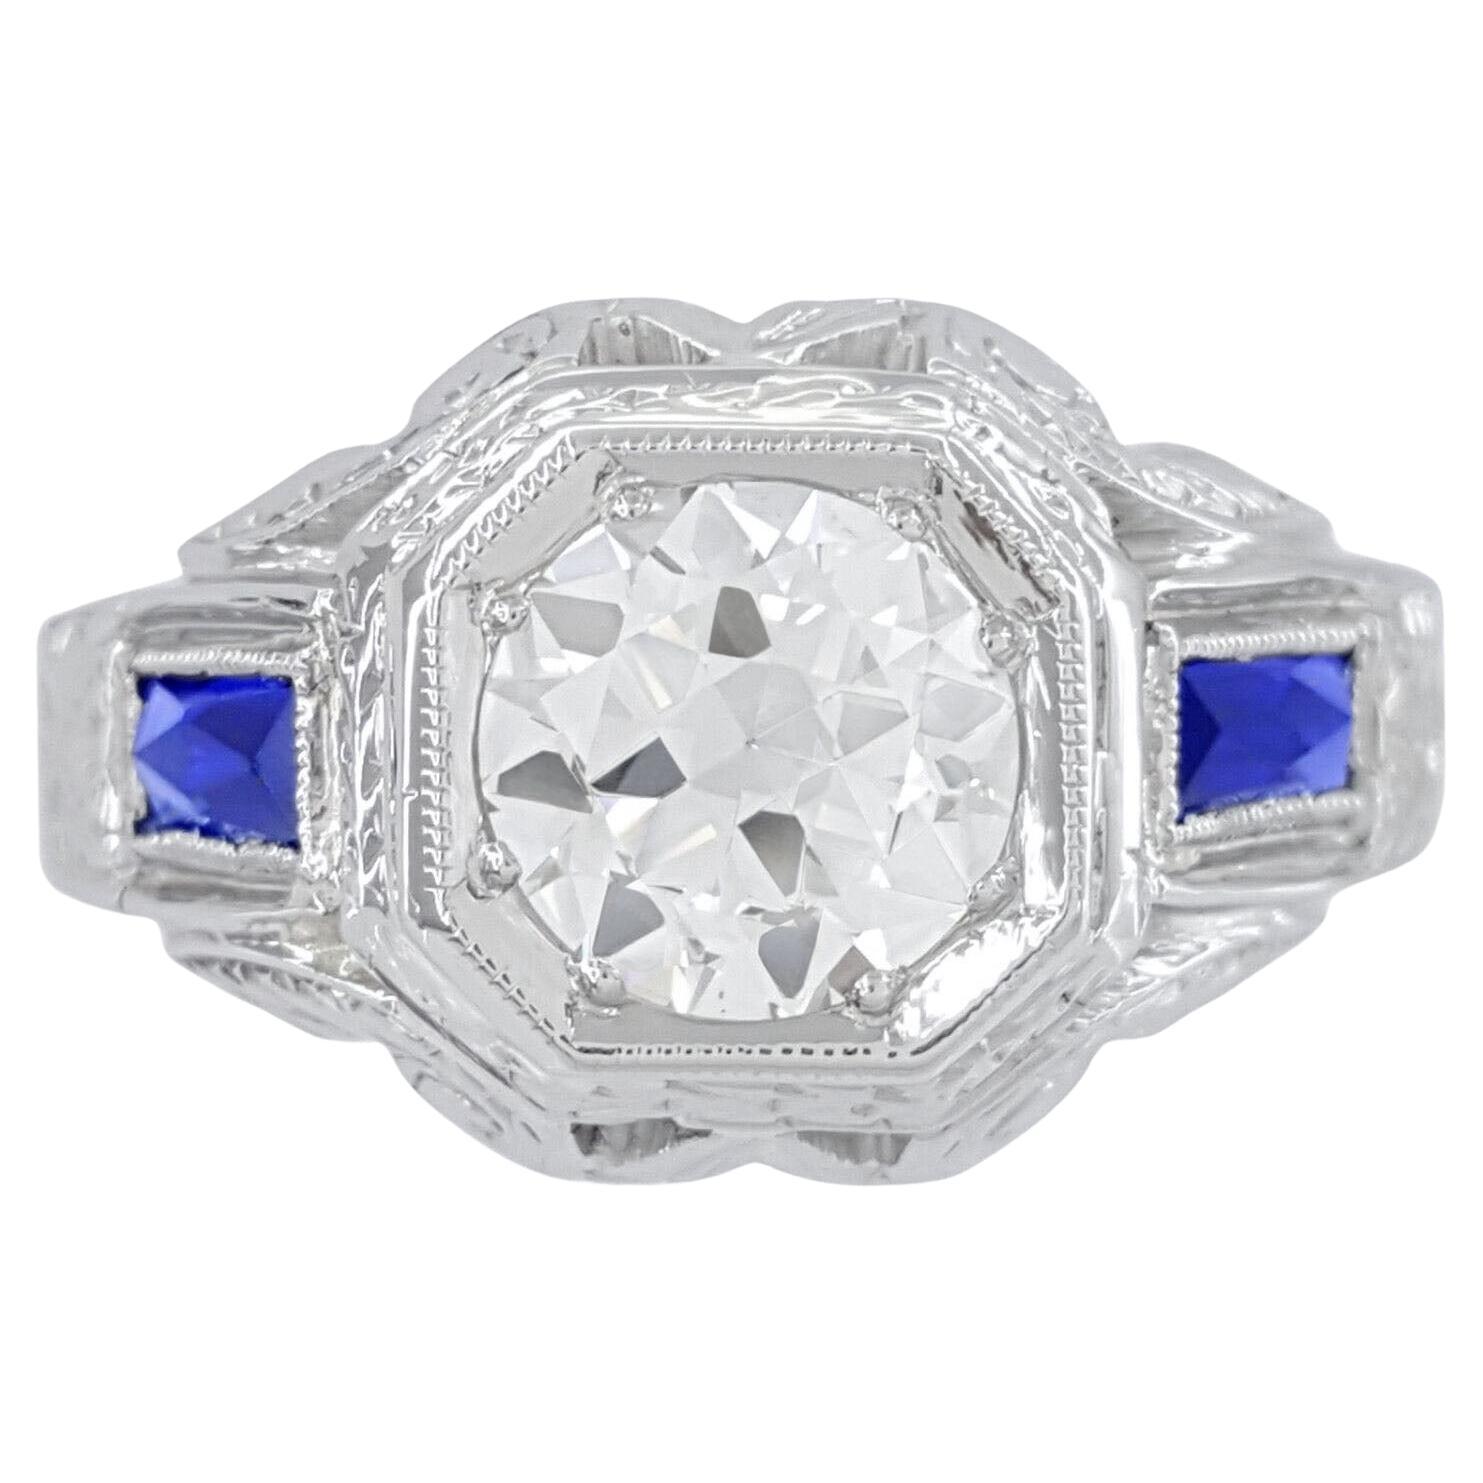 Vintage 1.30 Carat Transitional Round Diamond and Sapphire Art Deco Ring In Excellent Condition For Sale In Rome, IT